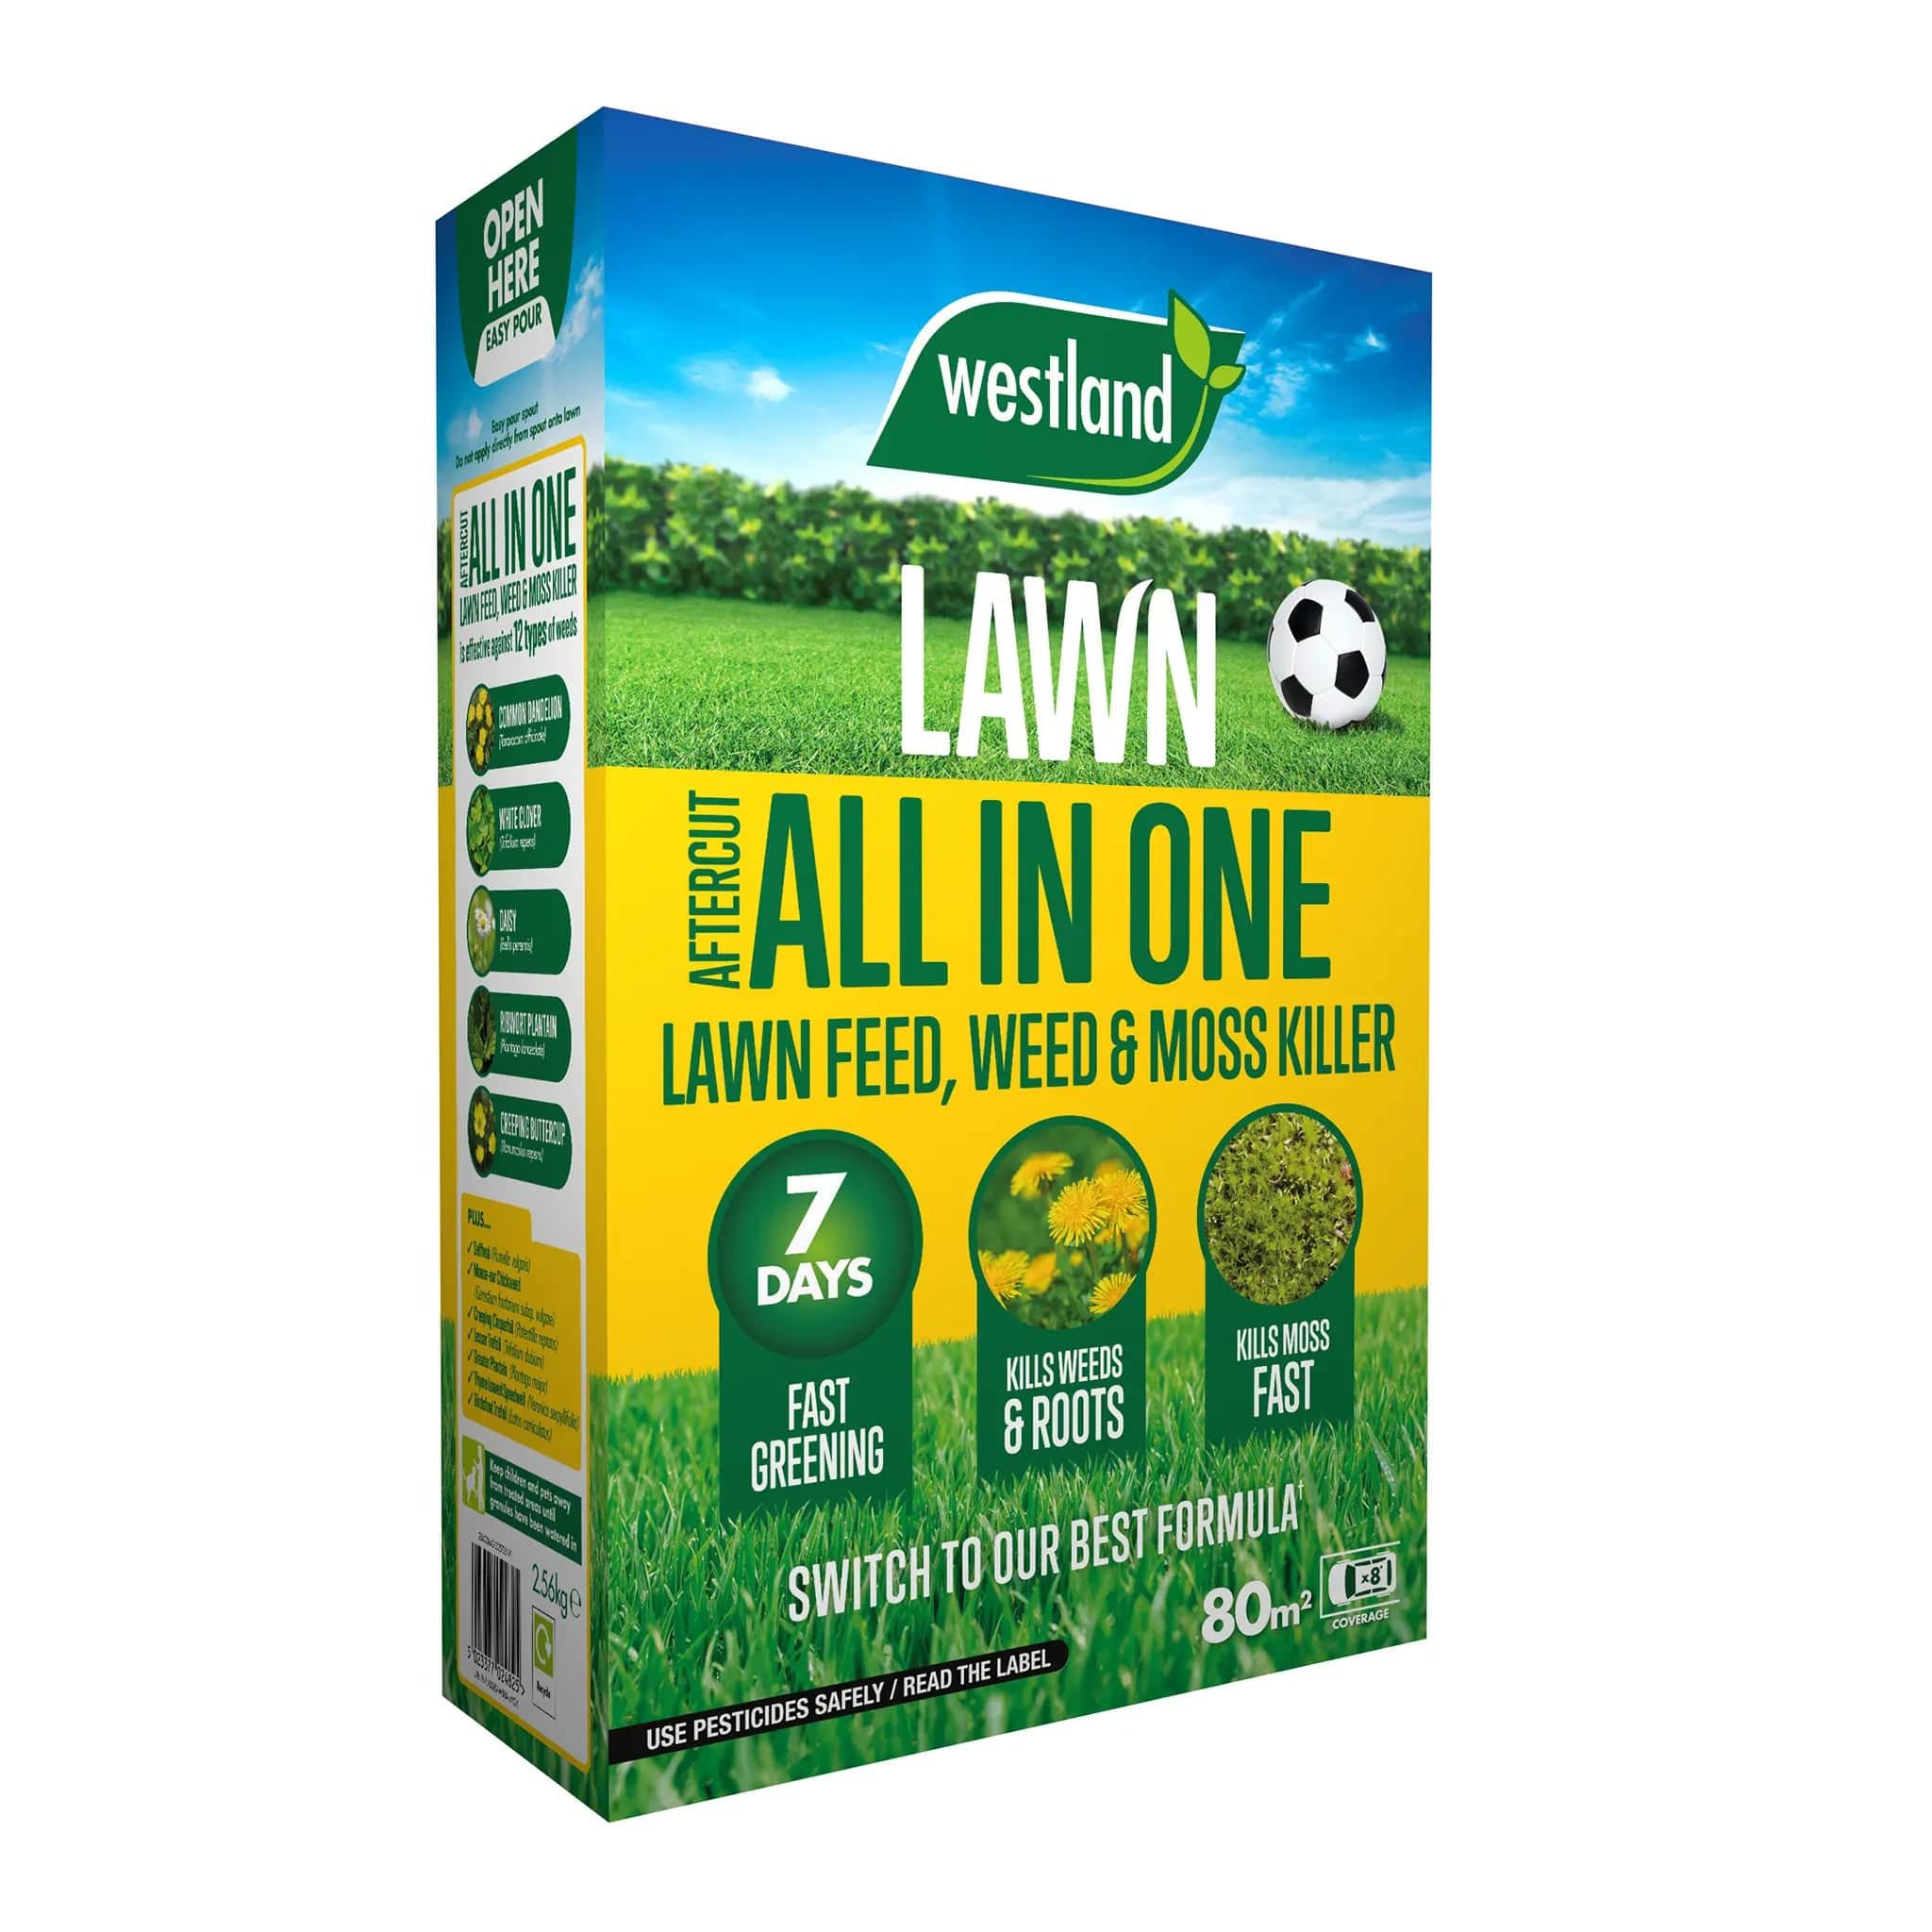 Westland Horticulture Lawn Feed & Weed Westland Aftercut All In One 80m² Box